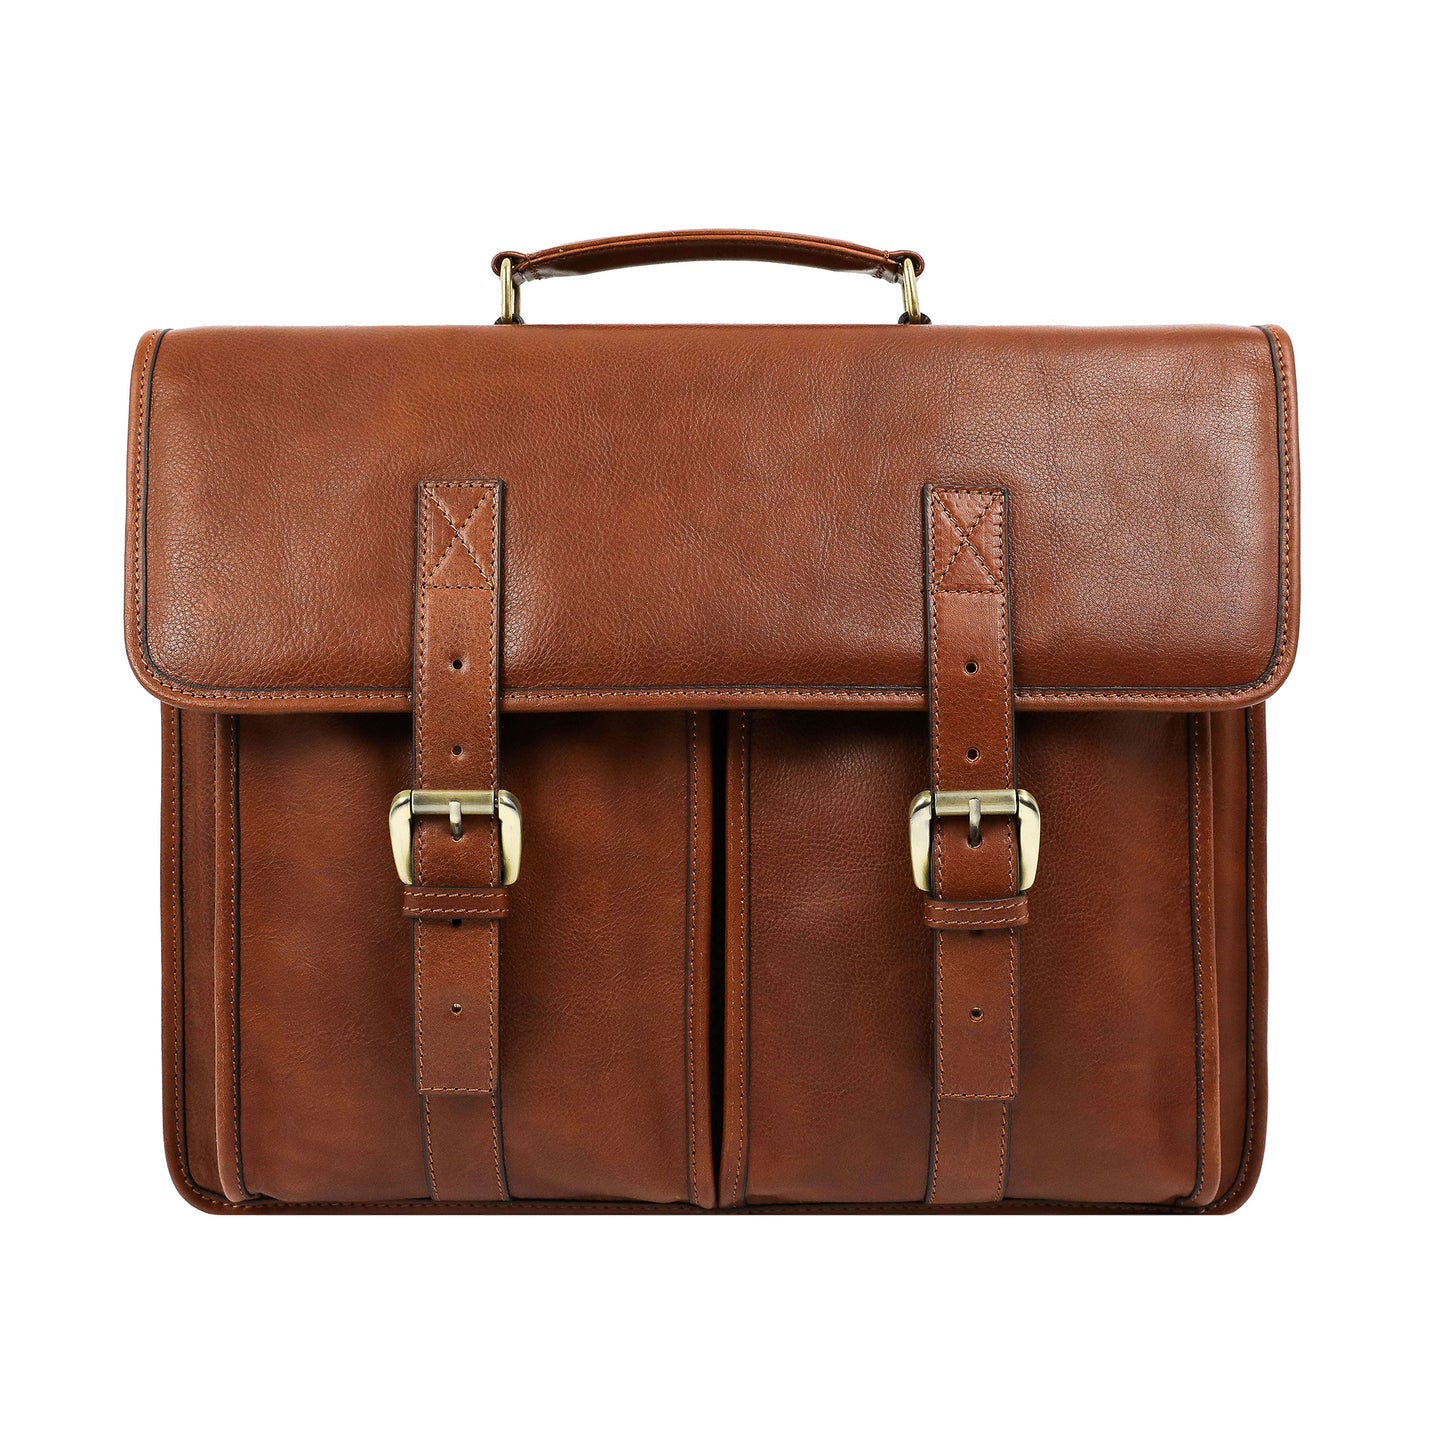 Leather Briefcase, Satchel Bag - The Time Machine